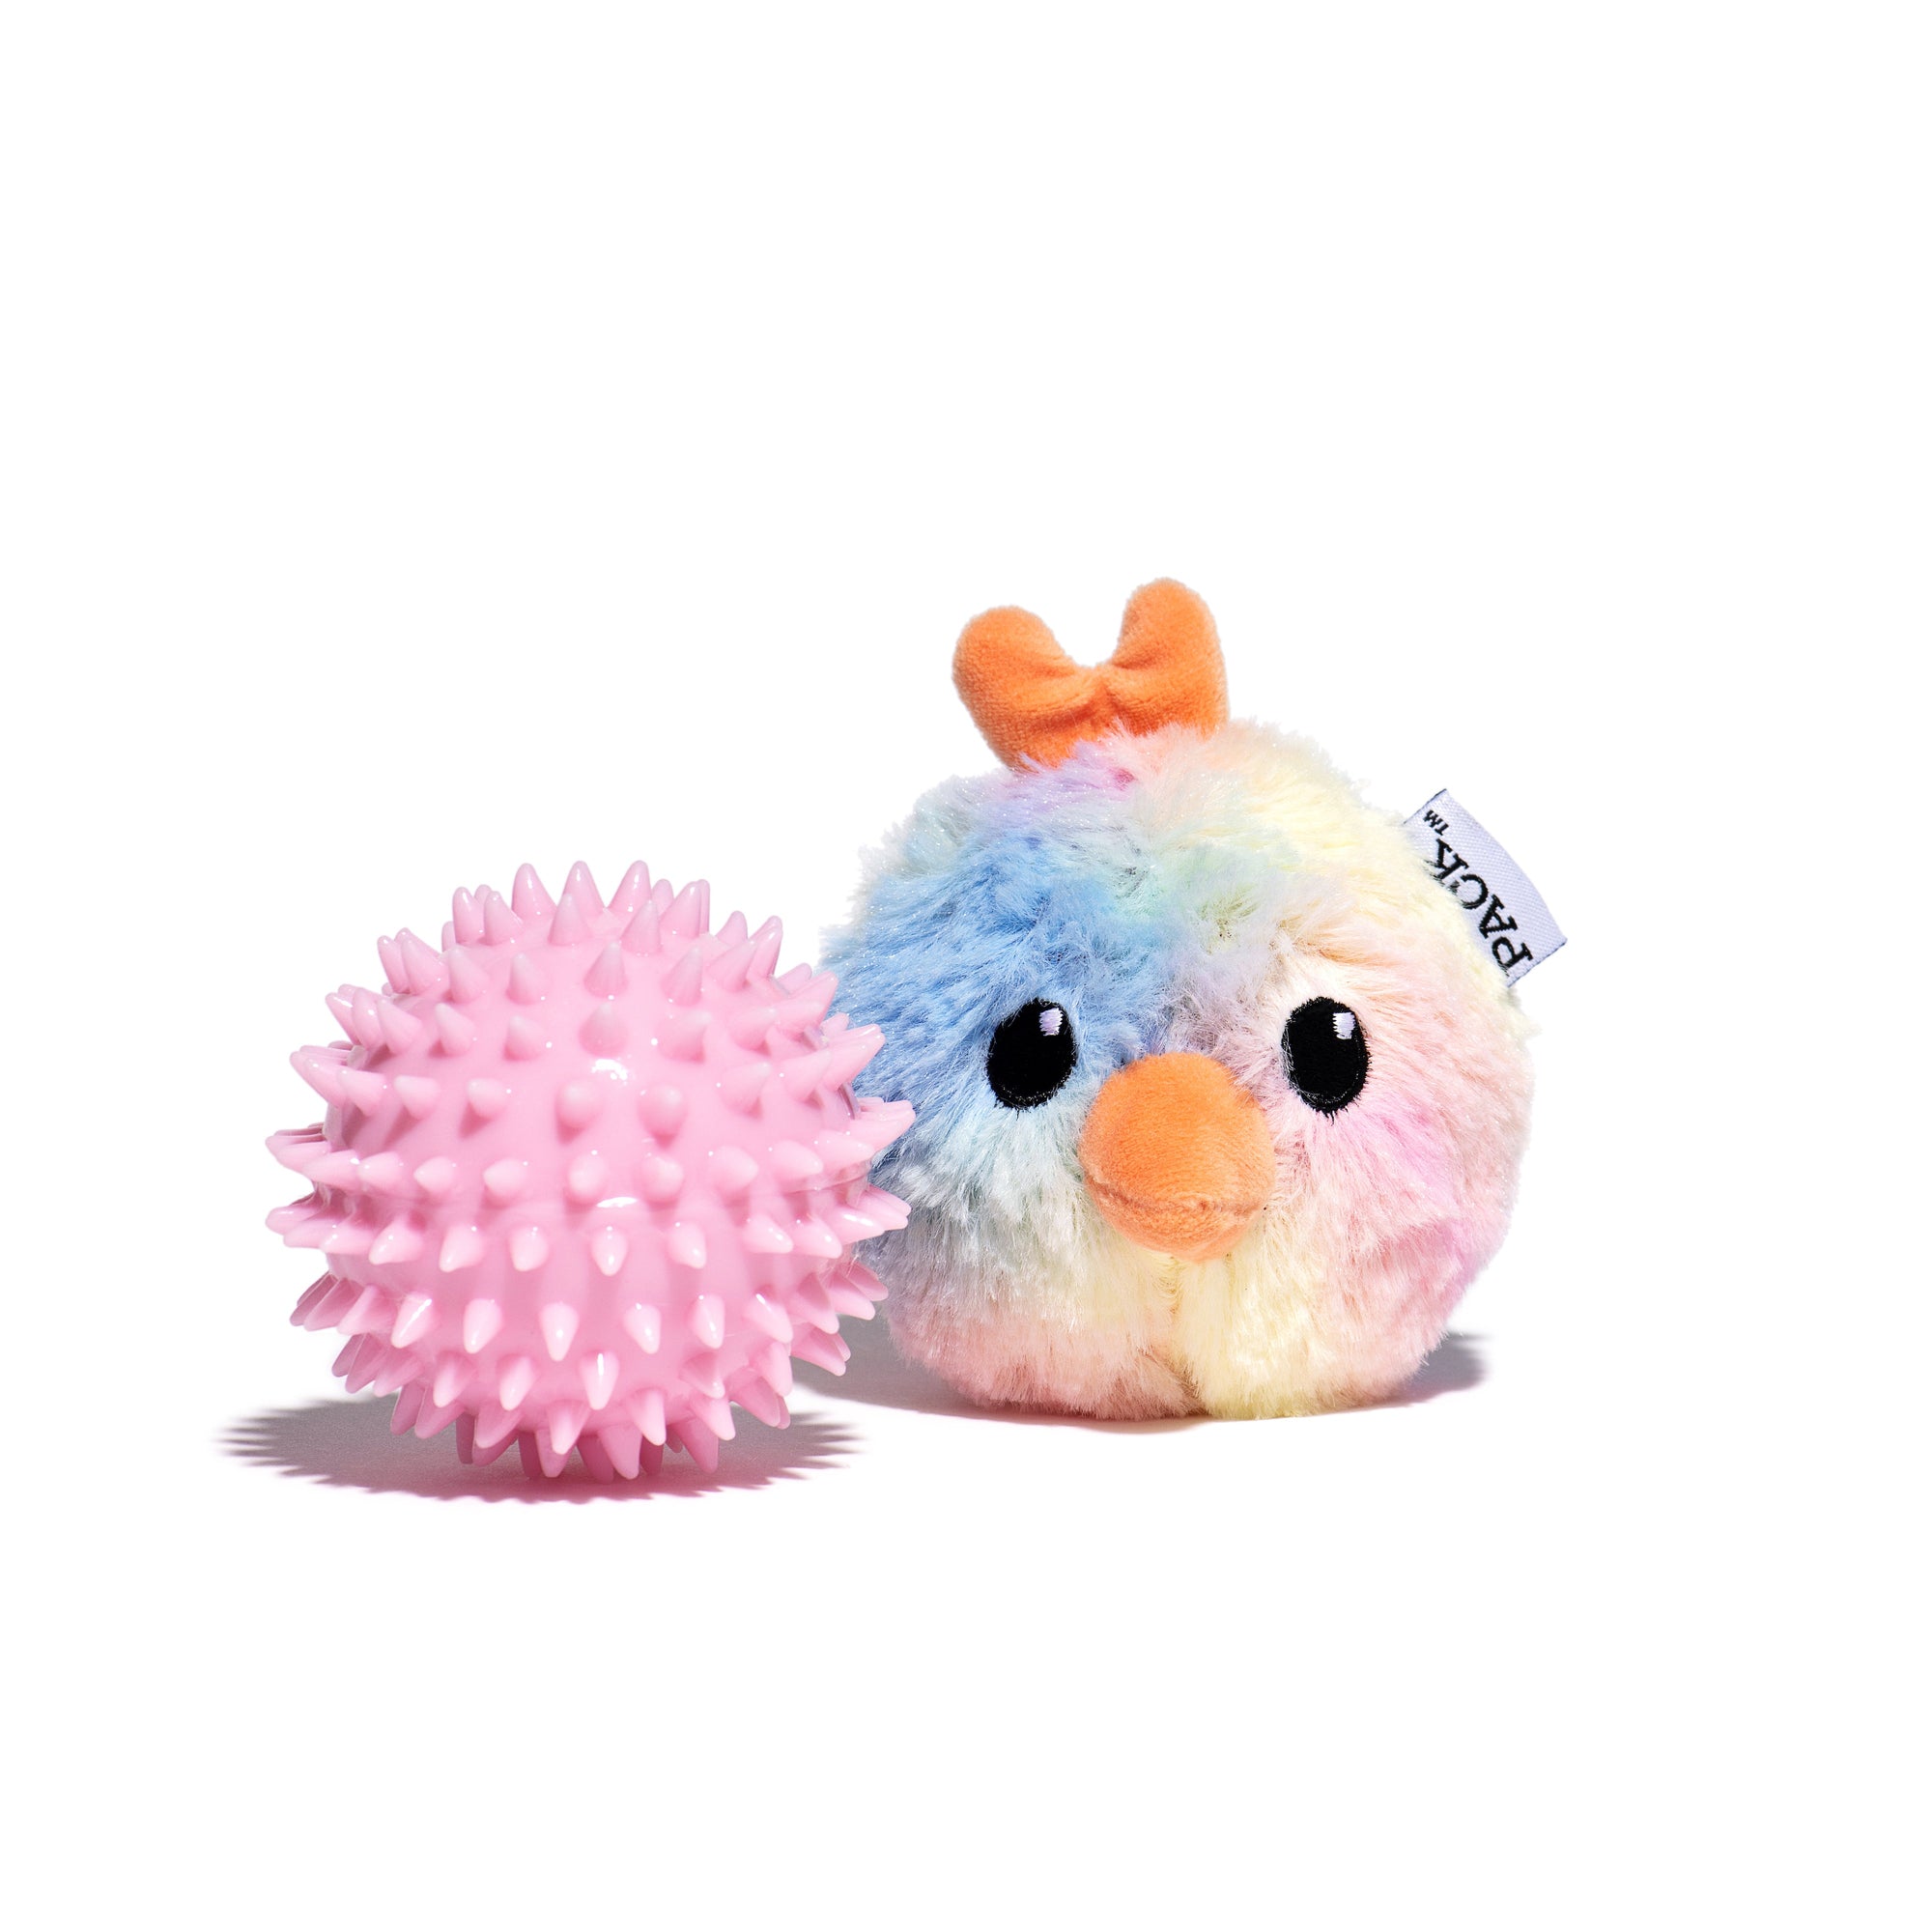 Mrs. Feathers (2-in-1 Toy) - Free Product